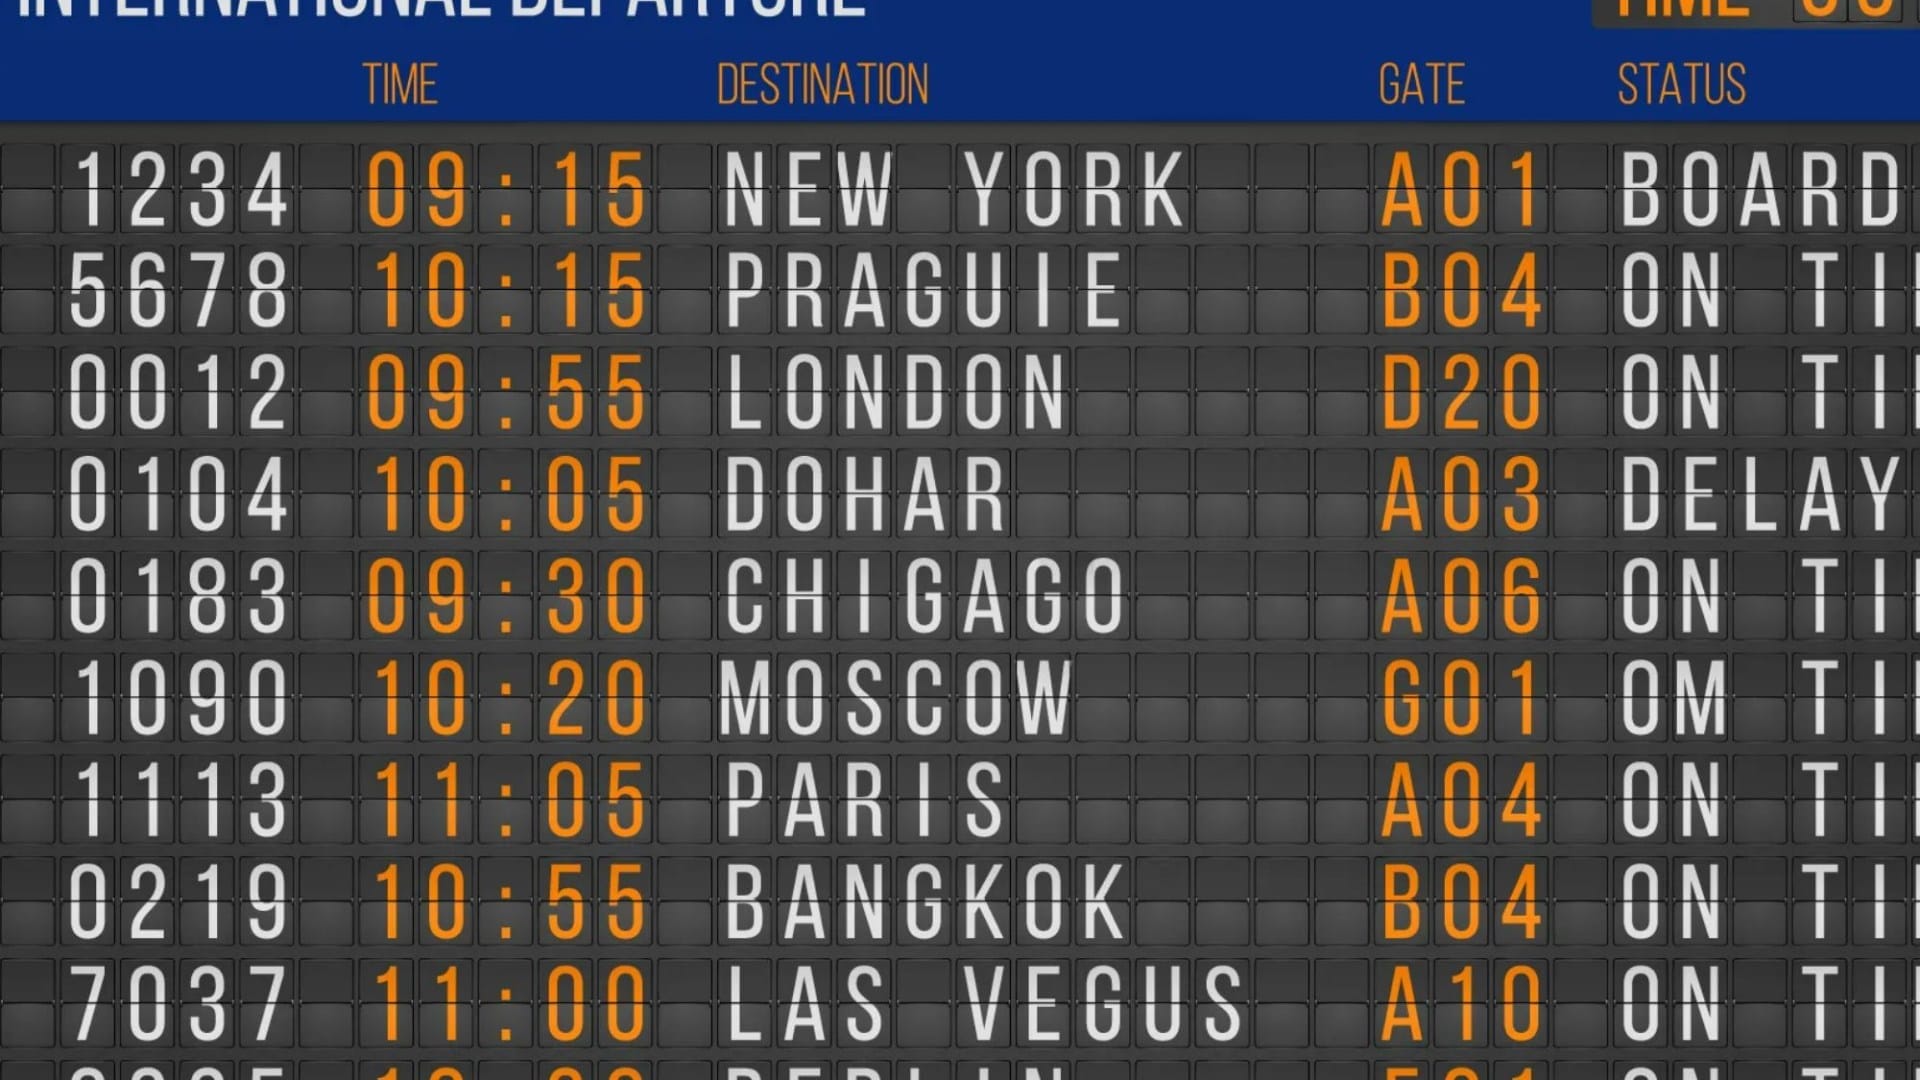 Only eagle-eyed players will spot the errors on this departure board - so can you beat the 60 second record?